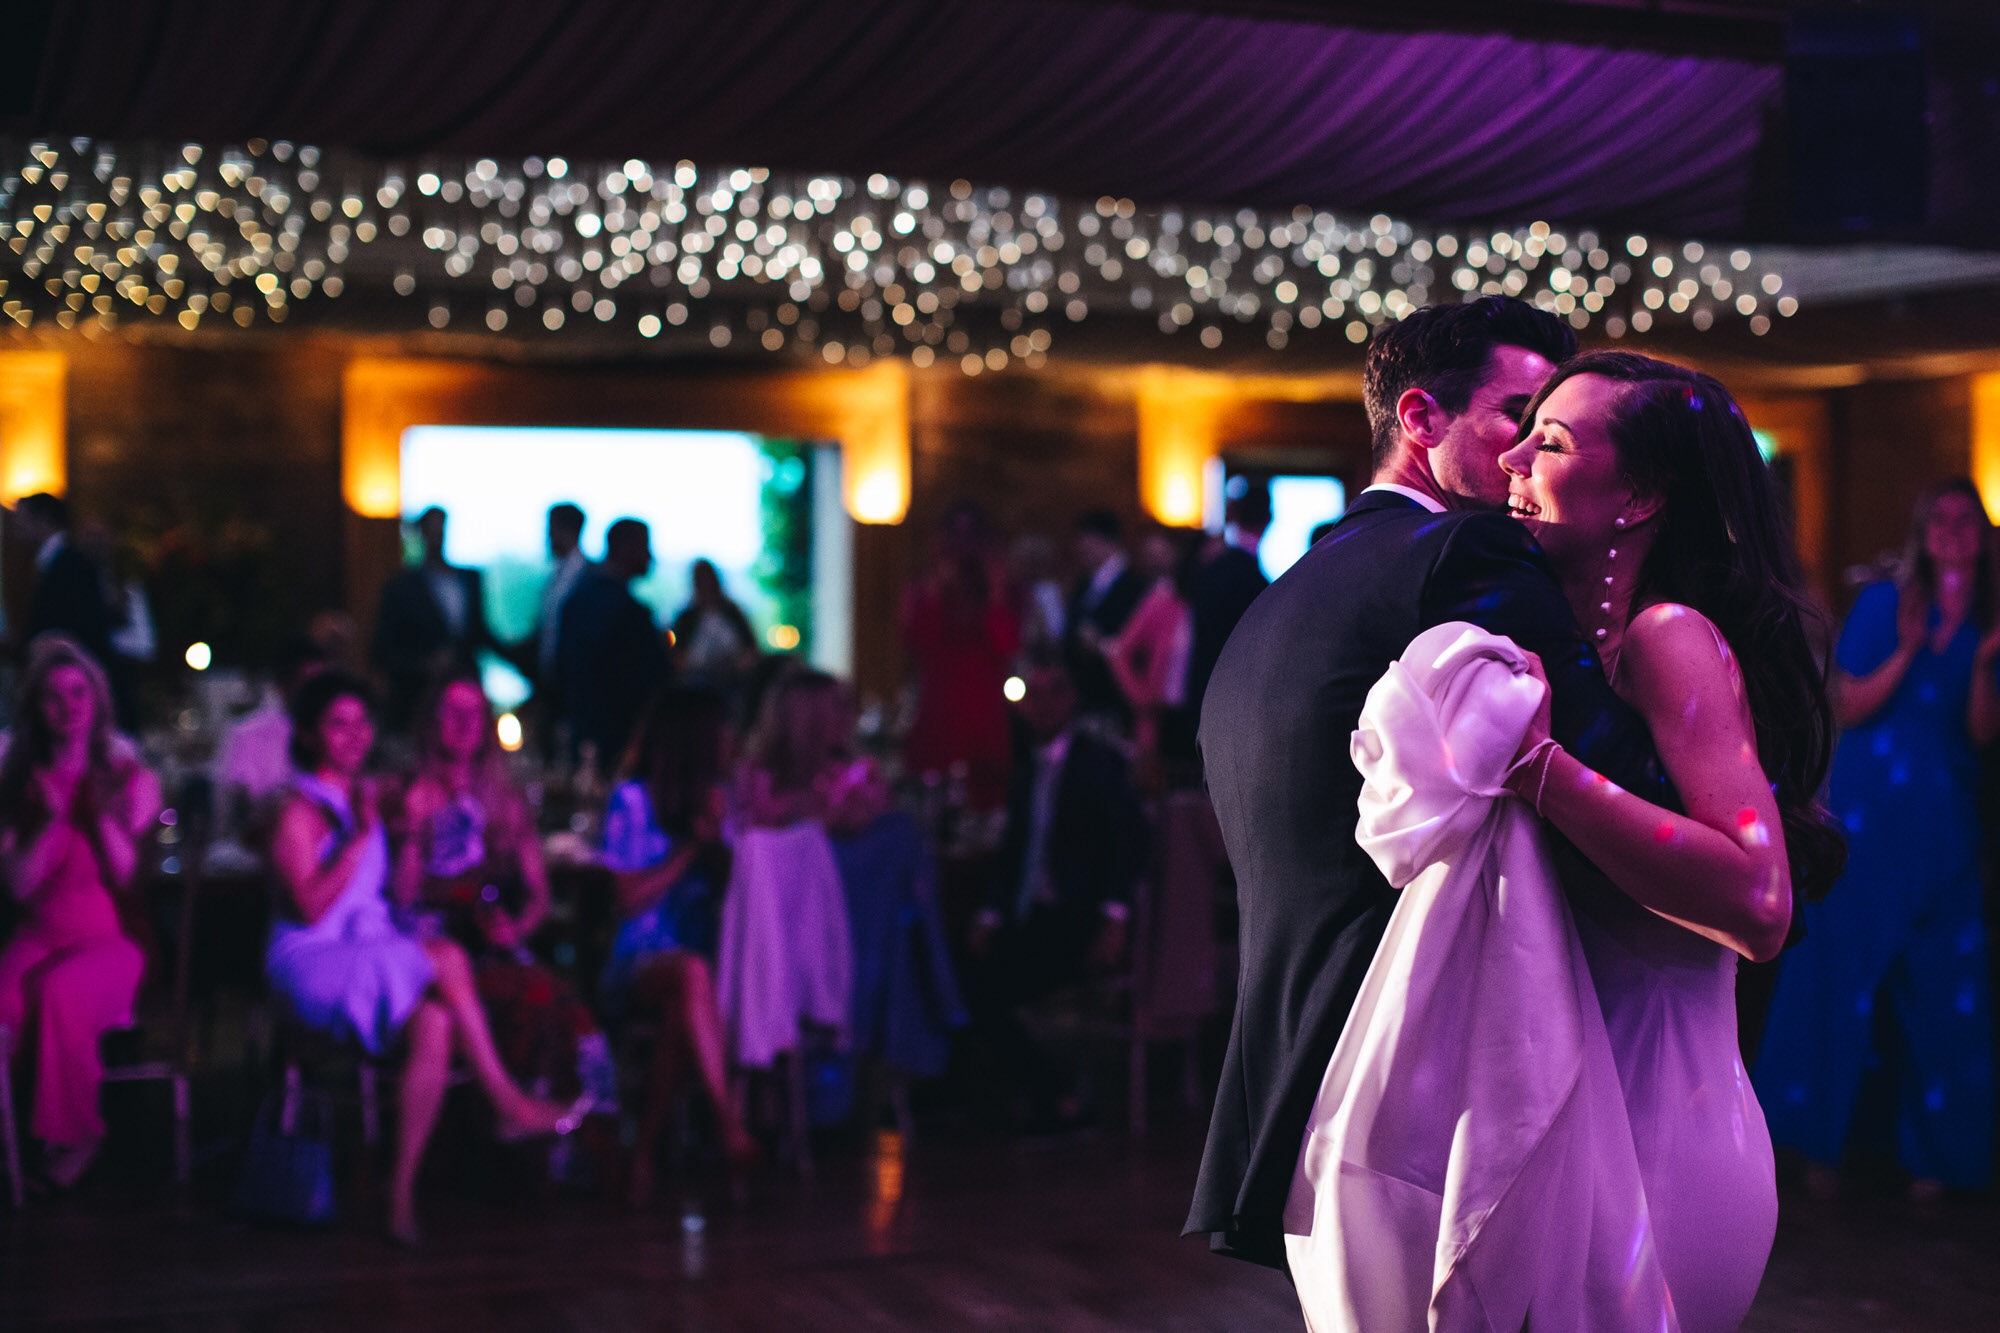 bride and groom hug, embrace at first dance, wedding photography at The Gillyflower, Elmore Court